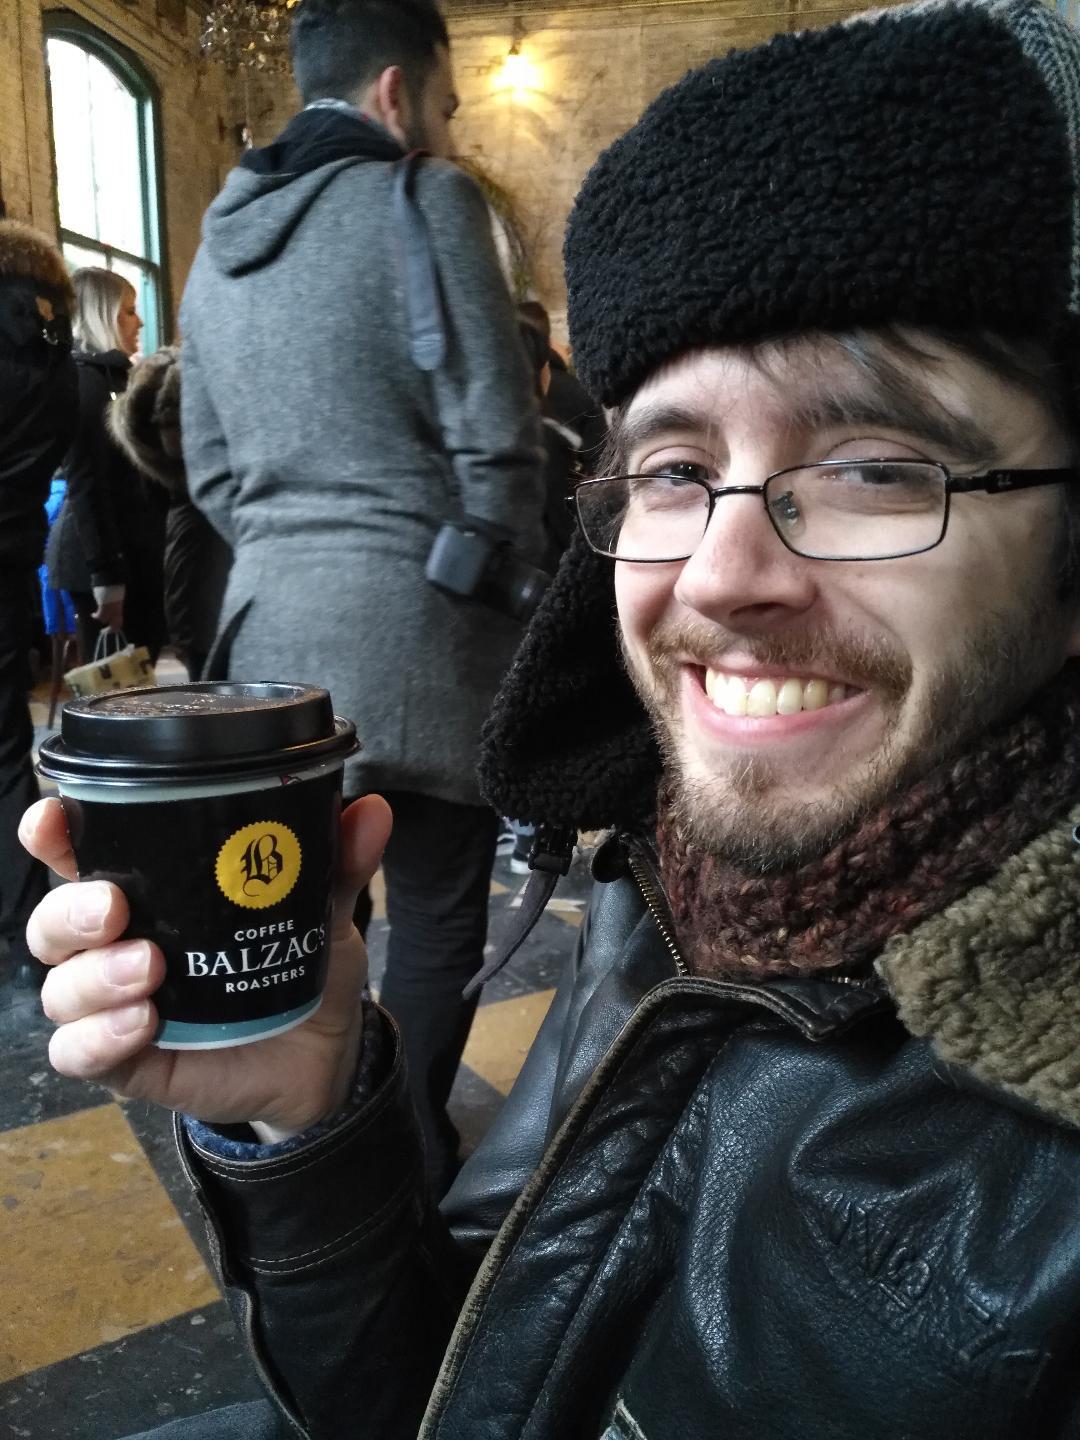 David Barrick wears thin-rimmed black glasses and a furry hat, with a sparse beard and mustache and a paper coffee cup in his hand; he is grinning and is sitting, with people's backs in the background behind him.